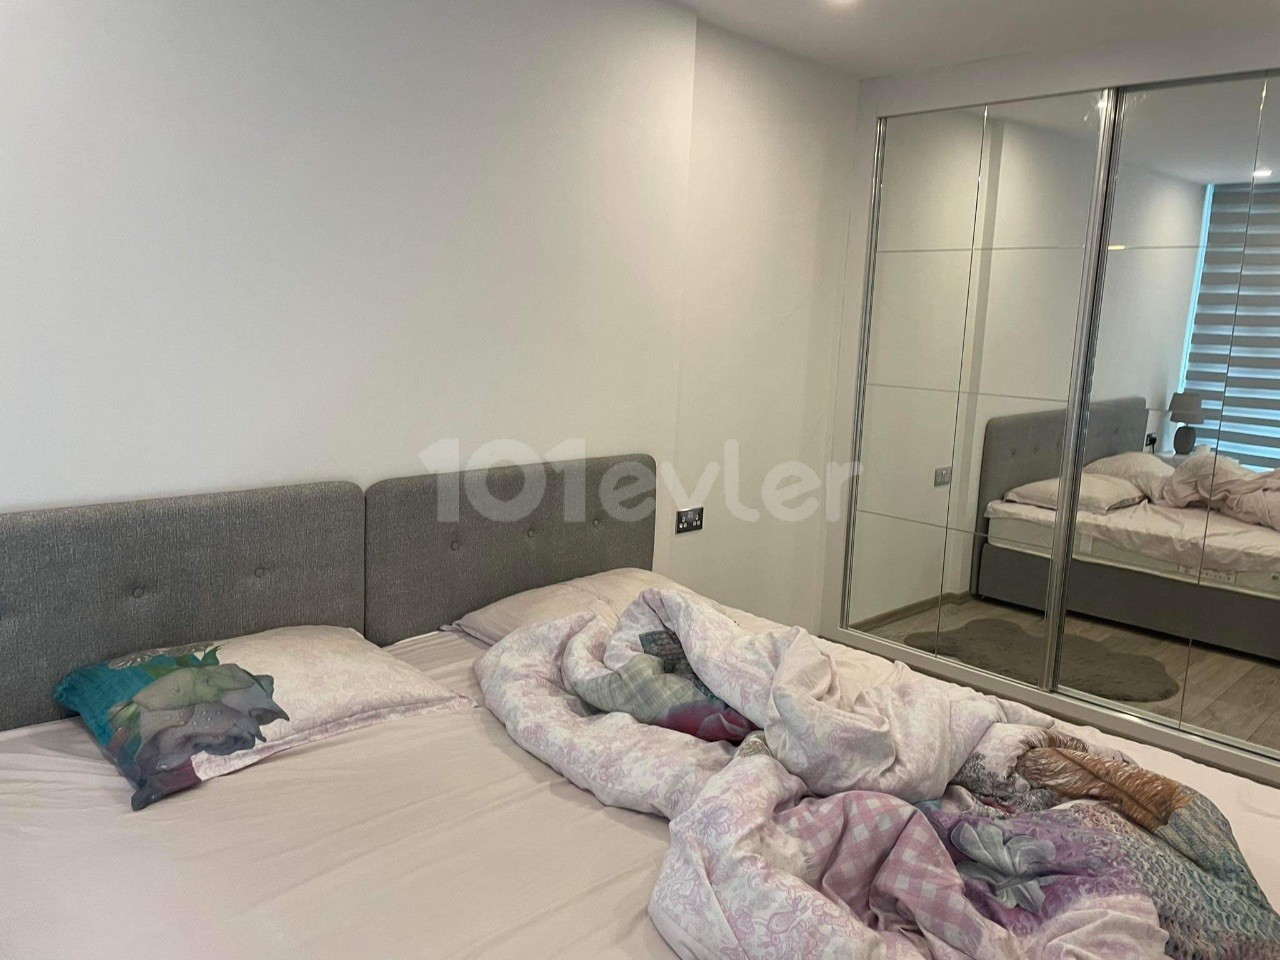 ULTRA LUXURY 1+1 FLAT IN KYRENIA CENTER AKACAN WITH EXTENSIVE FACILITIES SUCH AS SWIMMING POOL AND PARKING PARKING FULL CITY VIEW AND 2 BALCONIES..